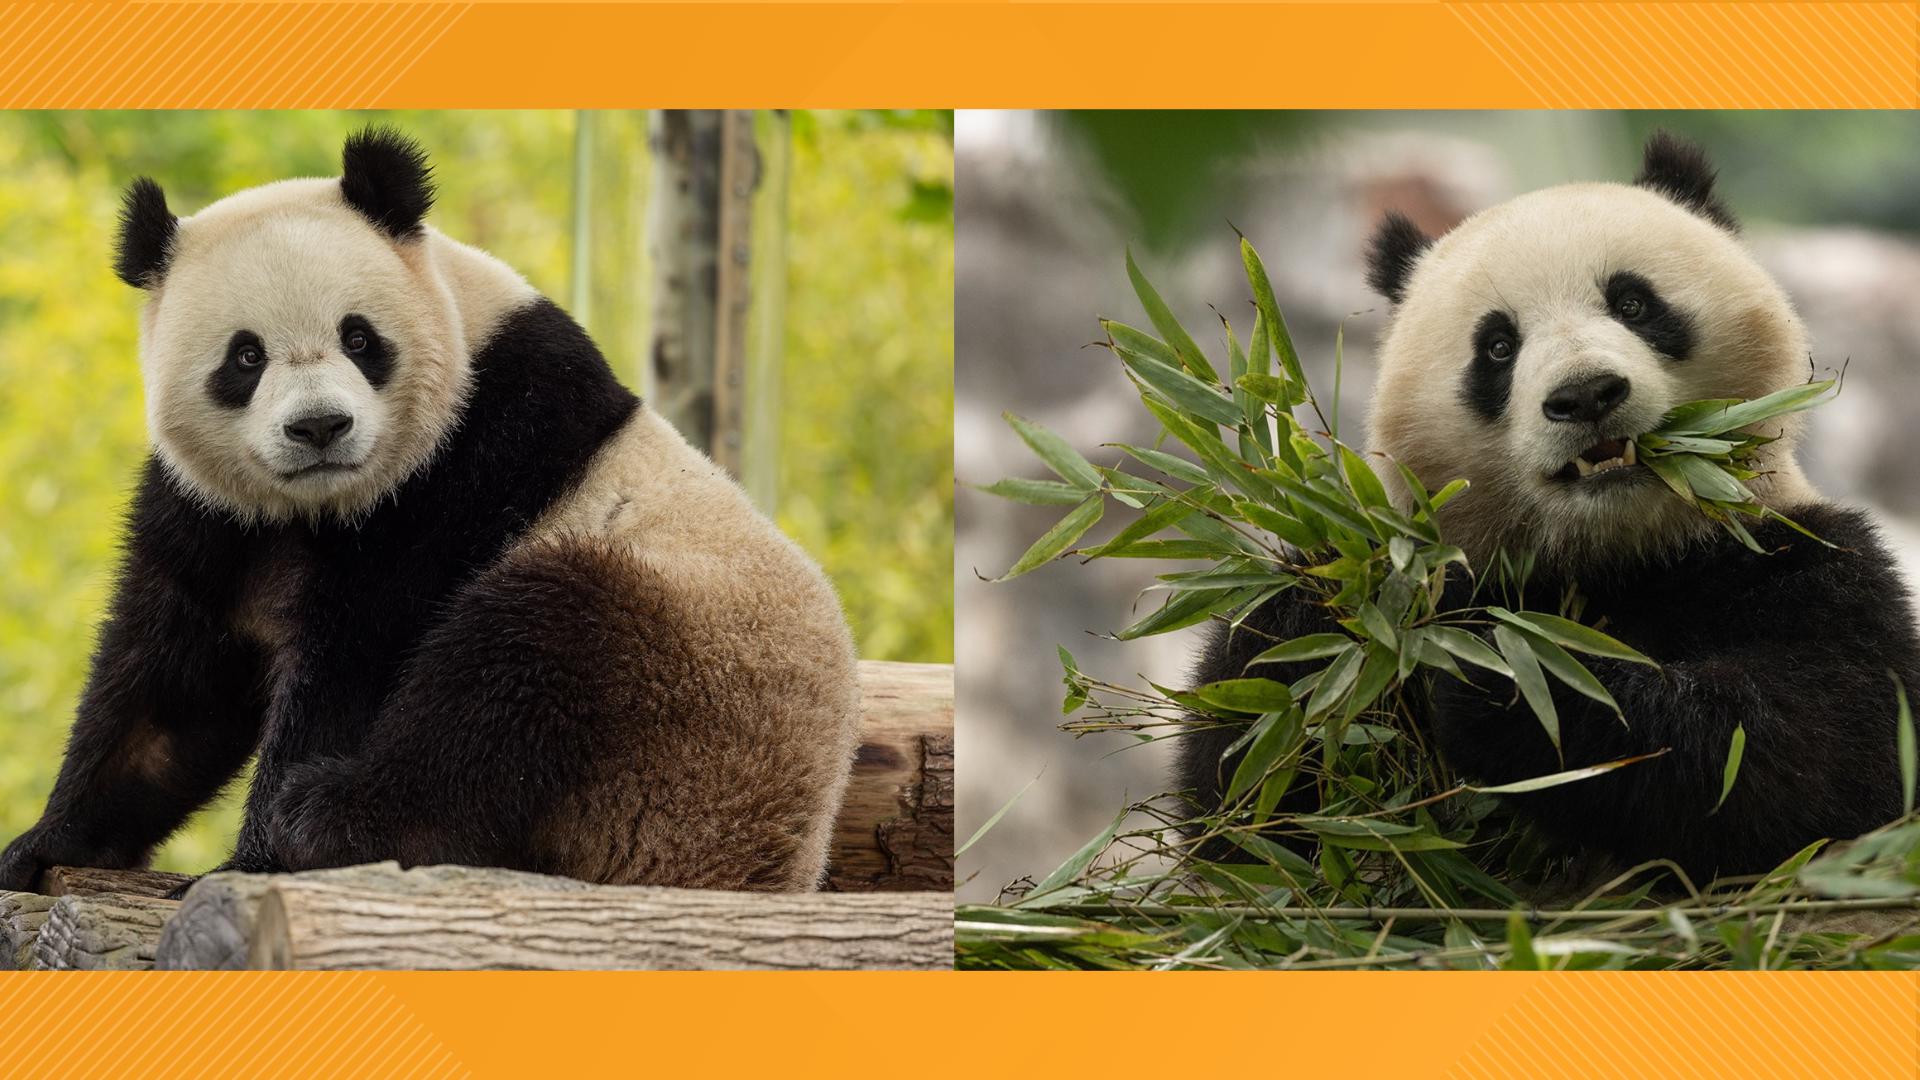 We don't mean to cause panda-monium but we have big news—The giant pandas will return to the District.